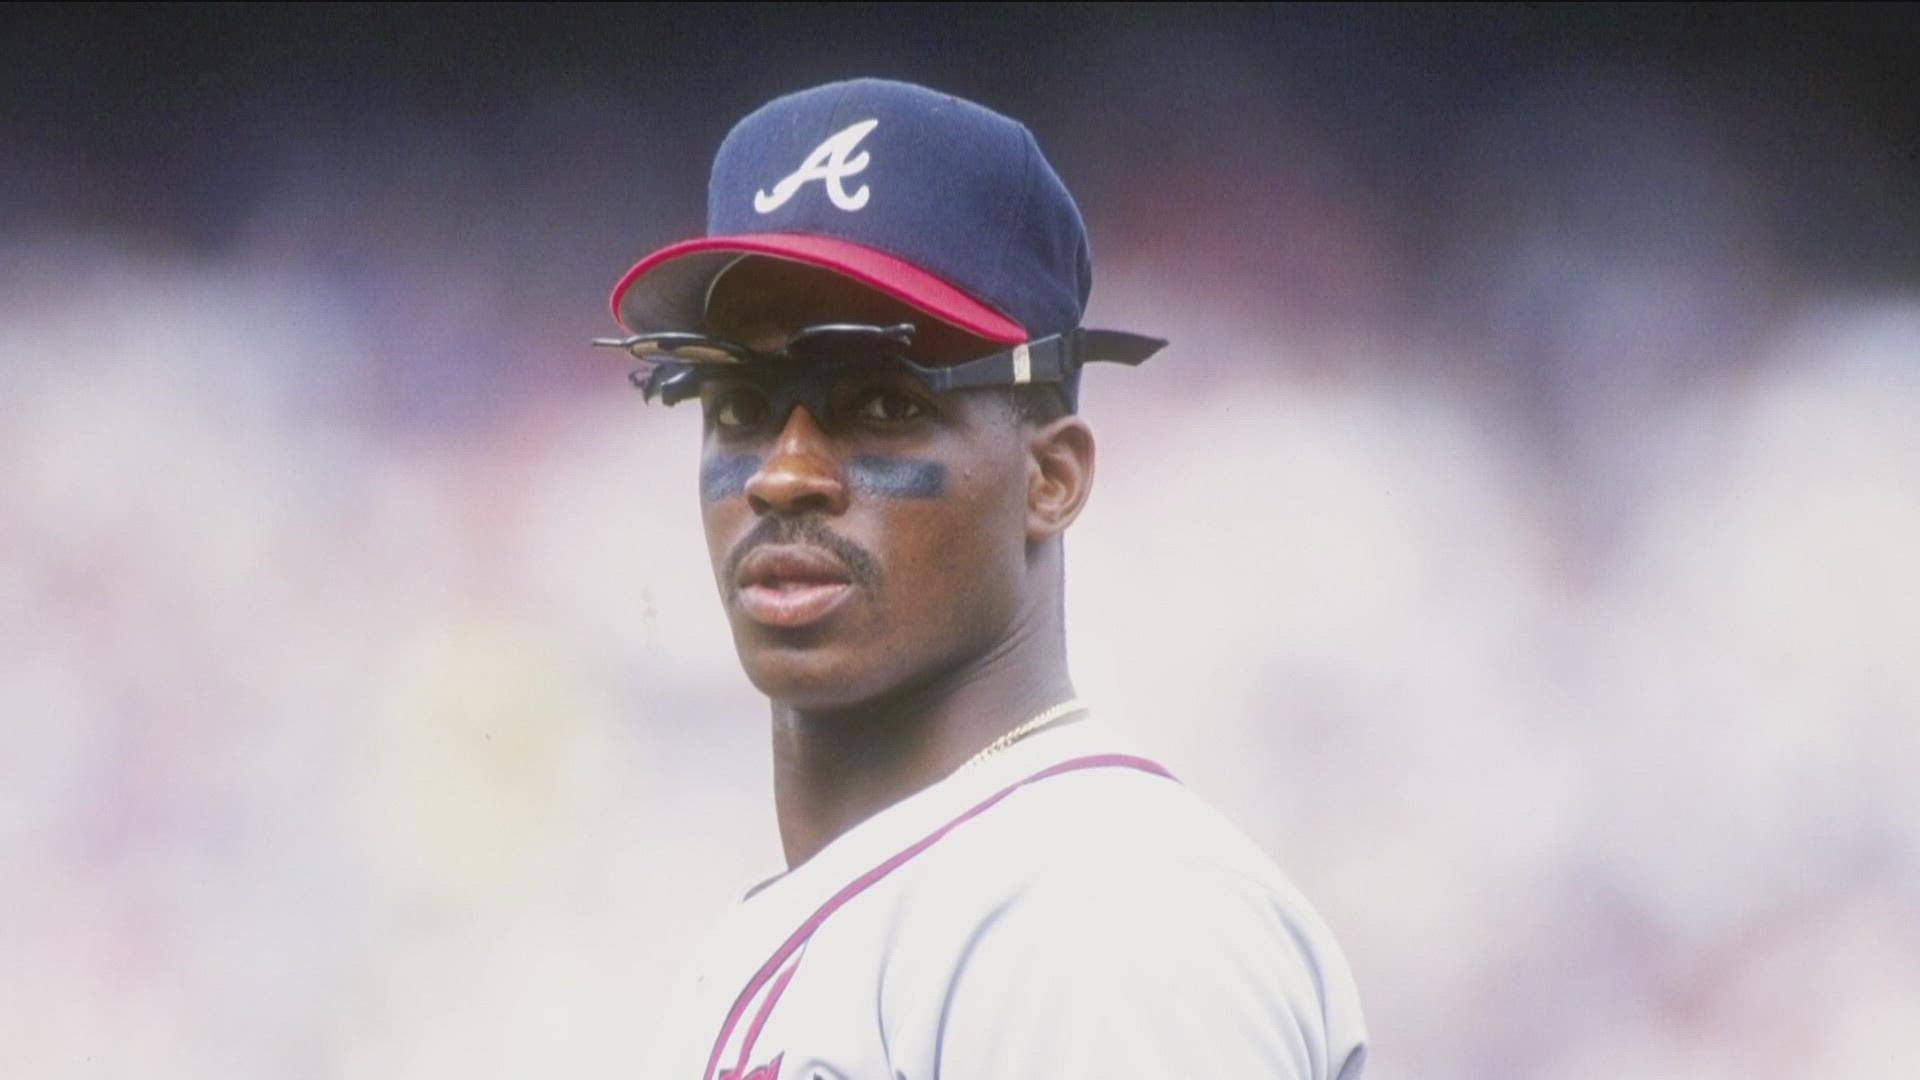 McGriff, nicknamed "Crime Dog," was a 5-time All-Star and 3-time Silver Slugger winner who won the 1995 World Series with the Atlanta Braves.